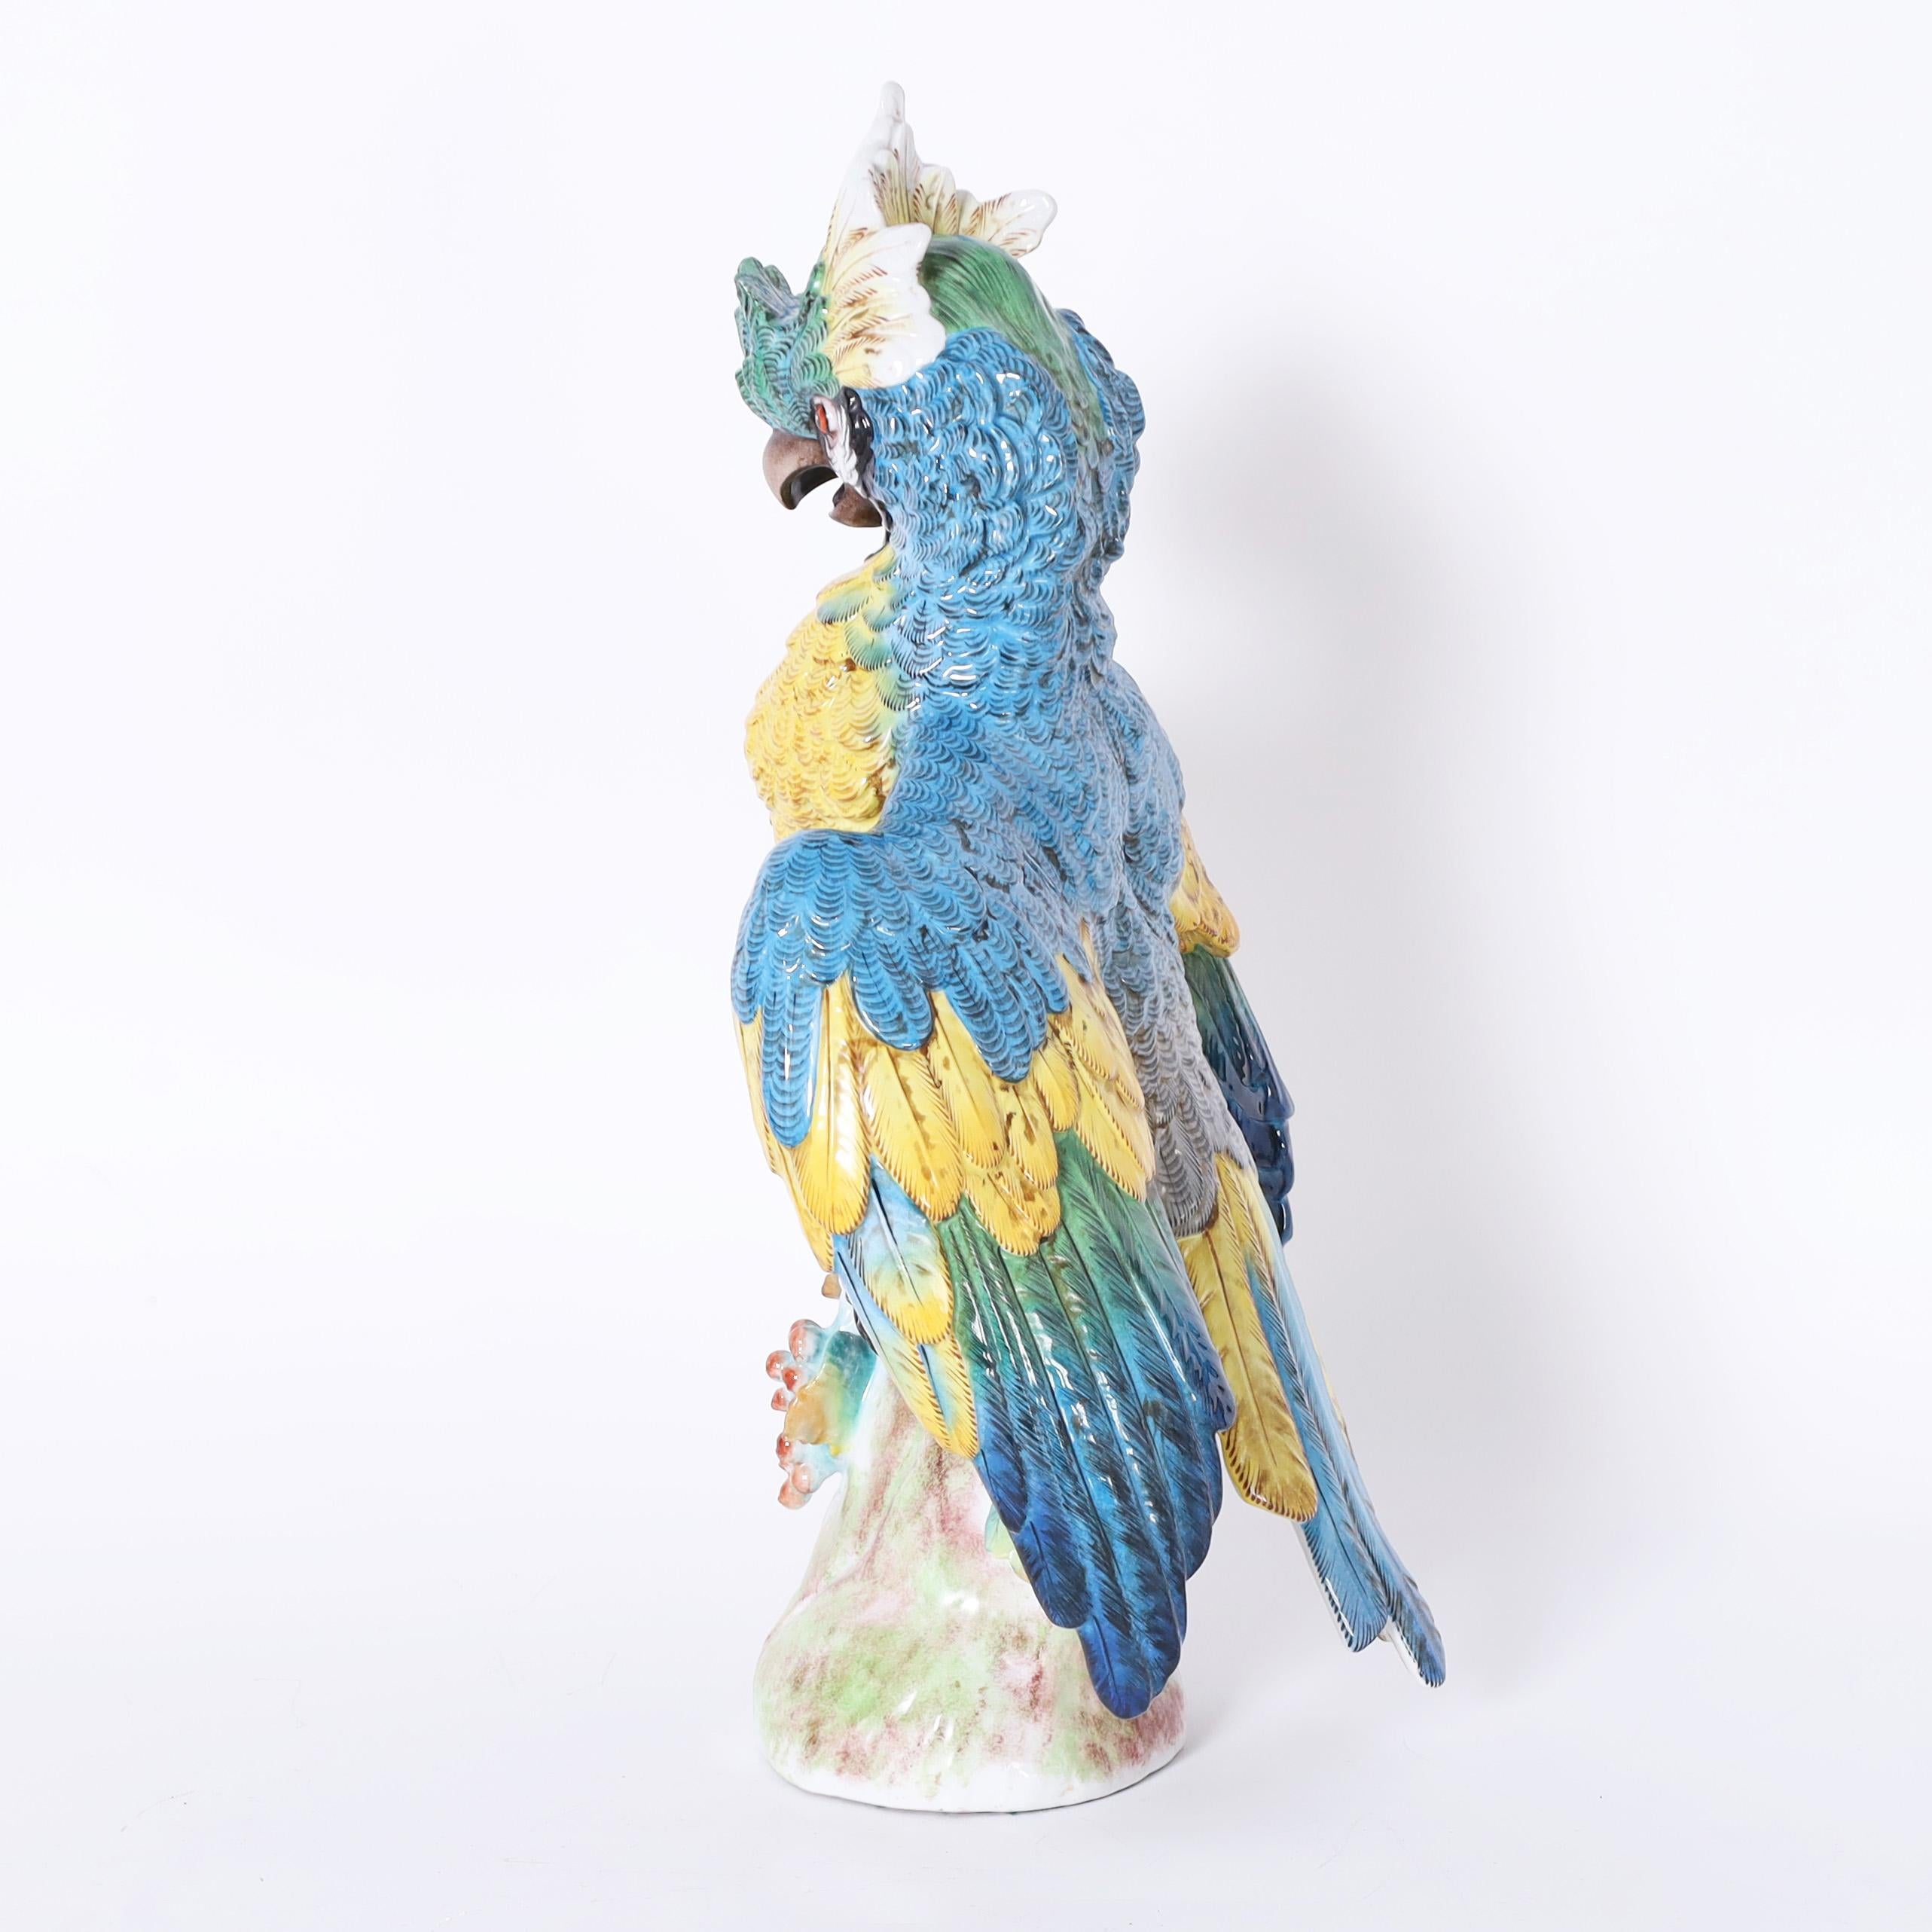 Standout life size porcelain parrot hand decorated in vivid tropical colors, glazed and perched on a tree trunk. Signed with crossed arrows on the back.